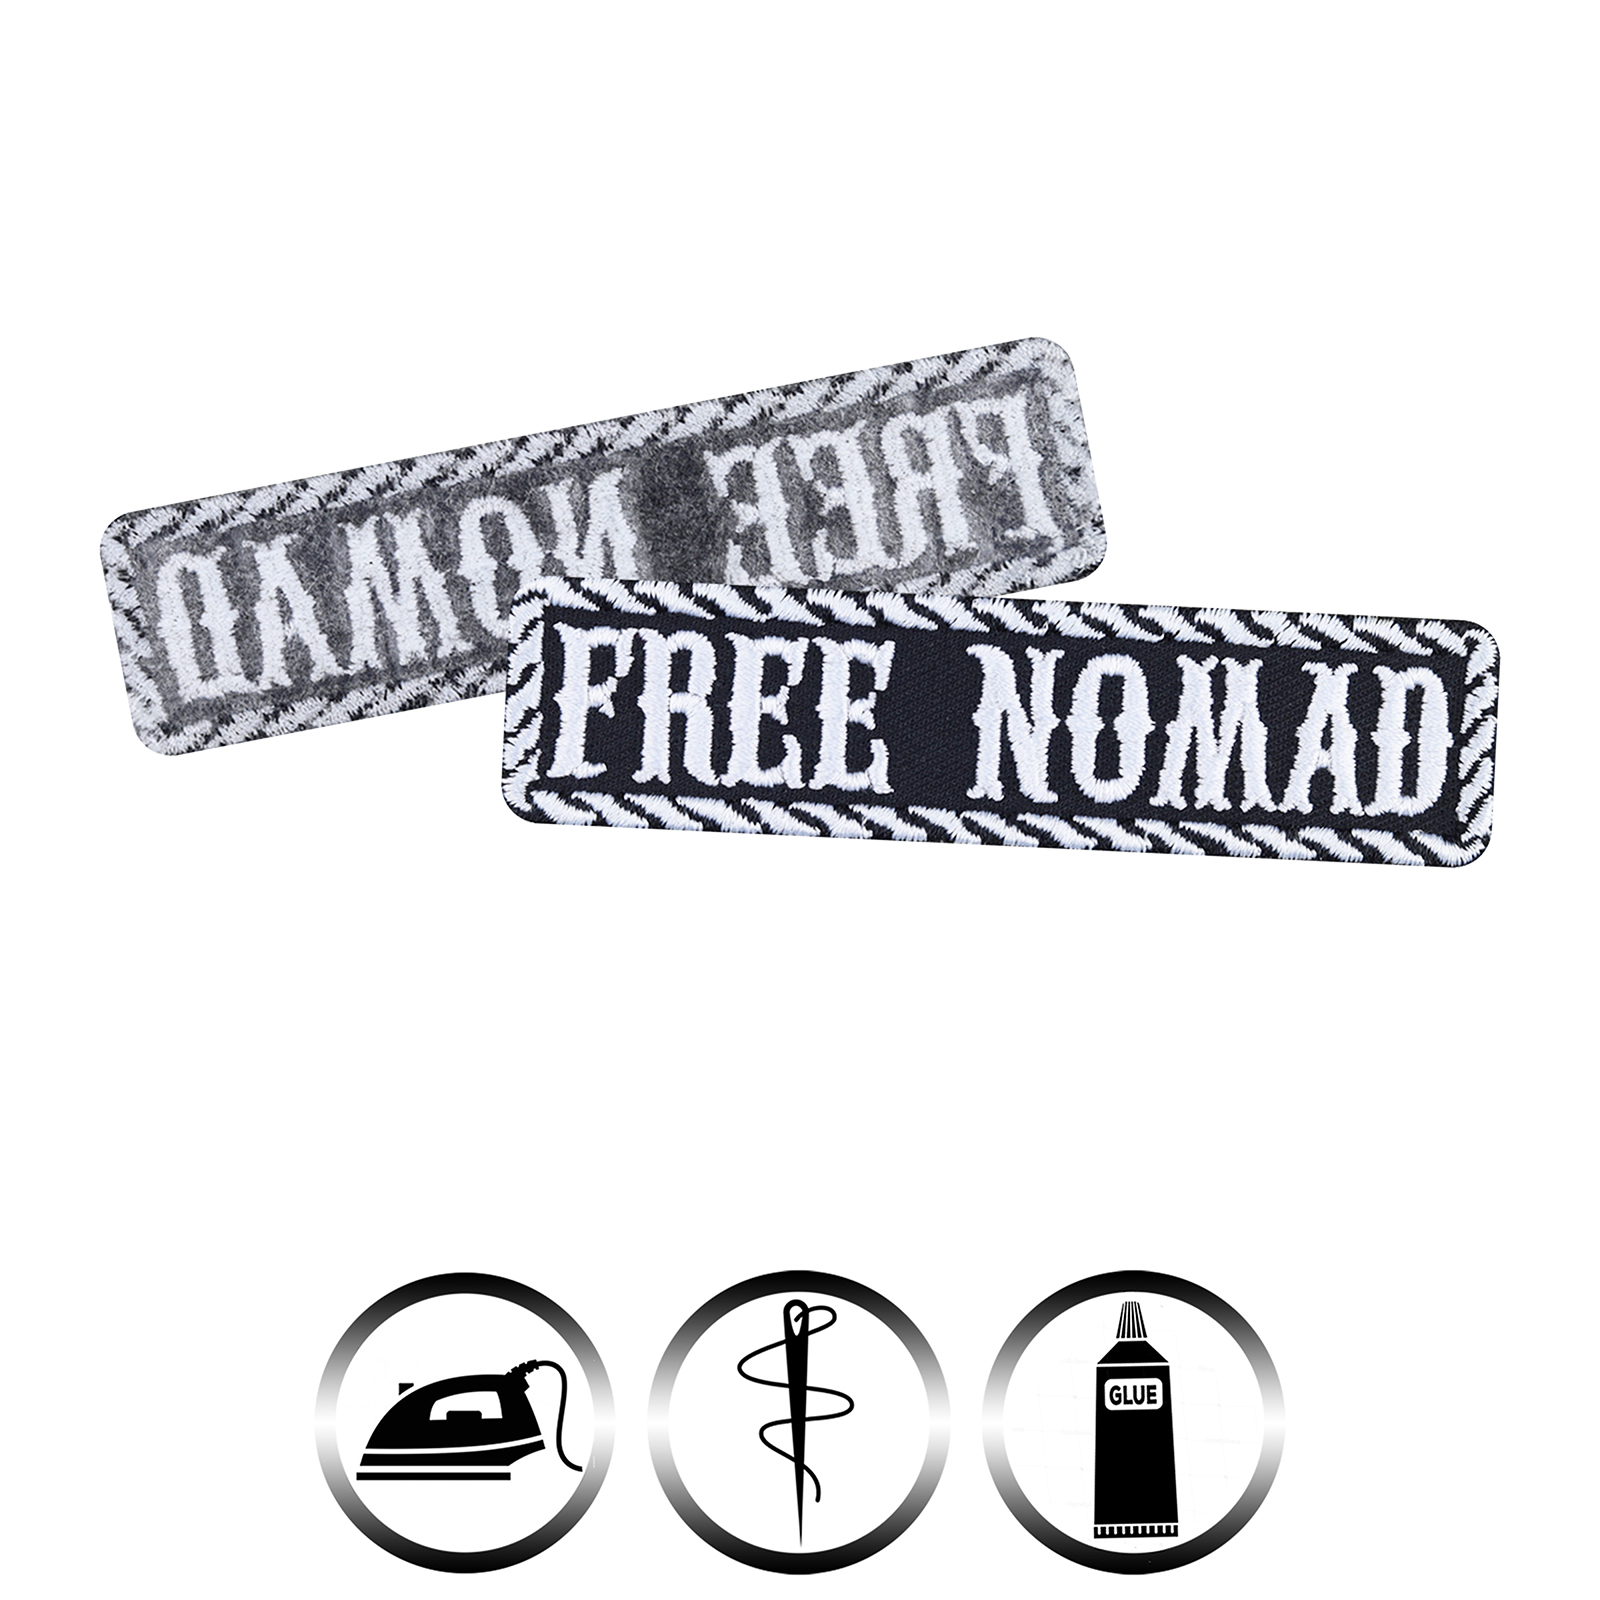 Free nomad - Patch